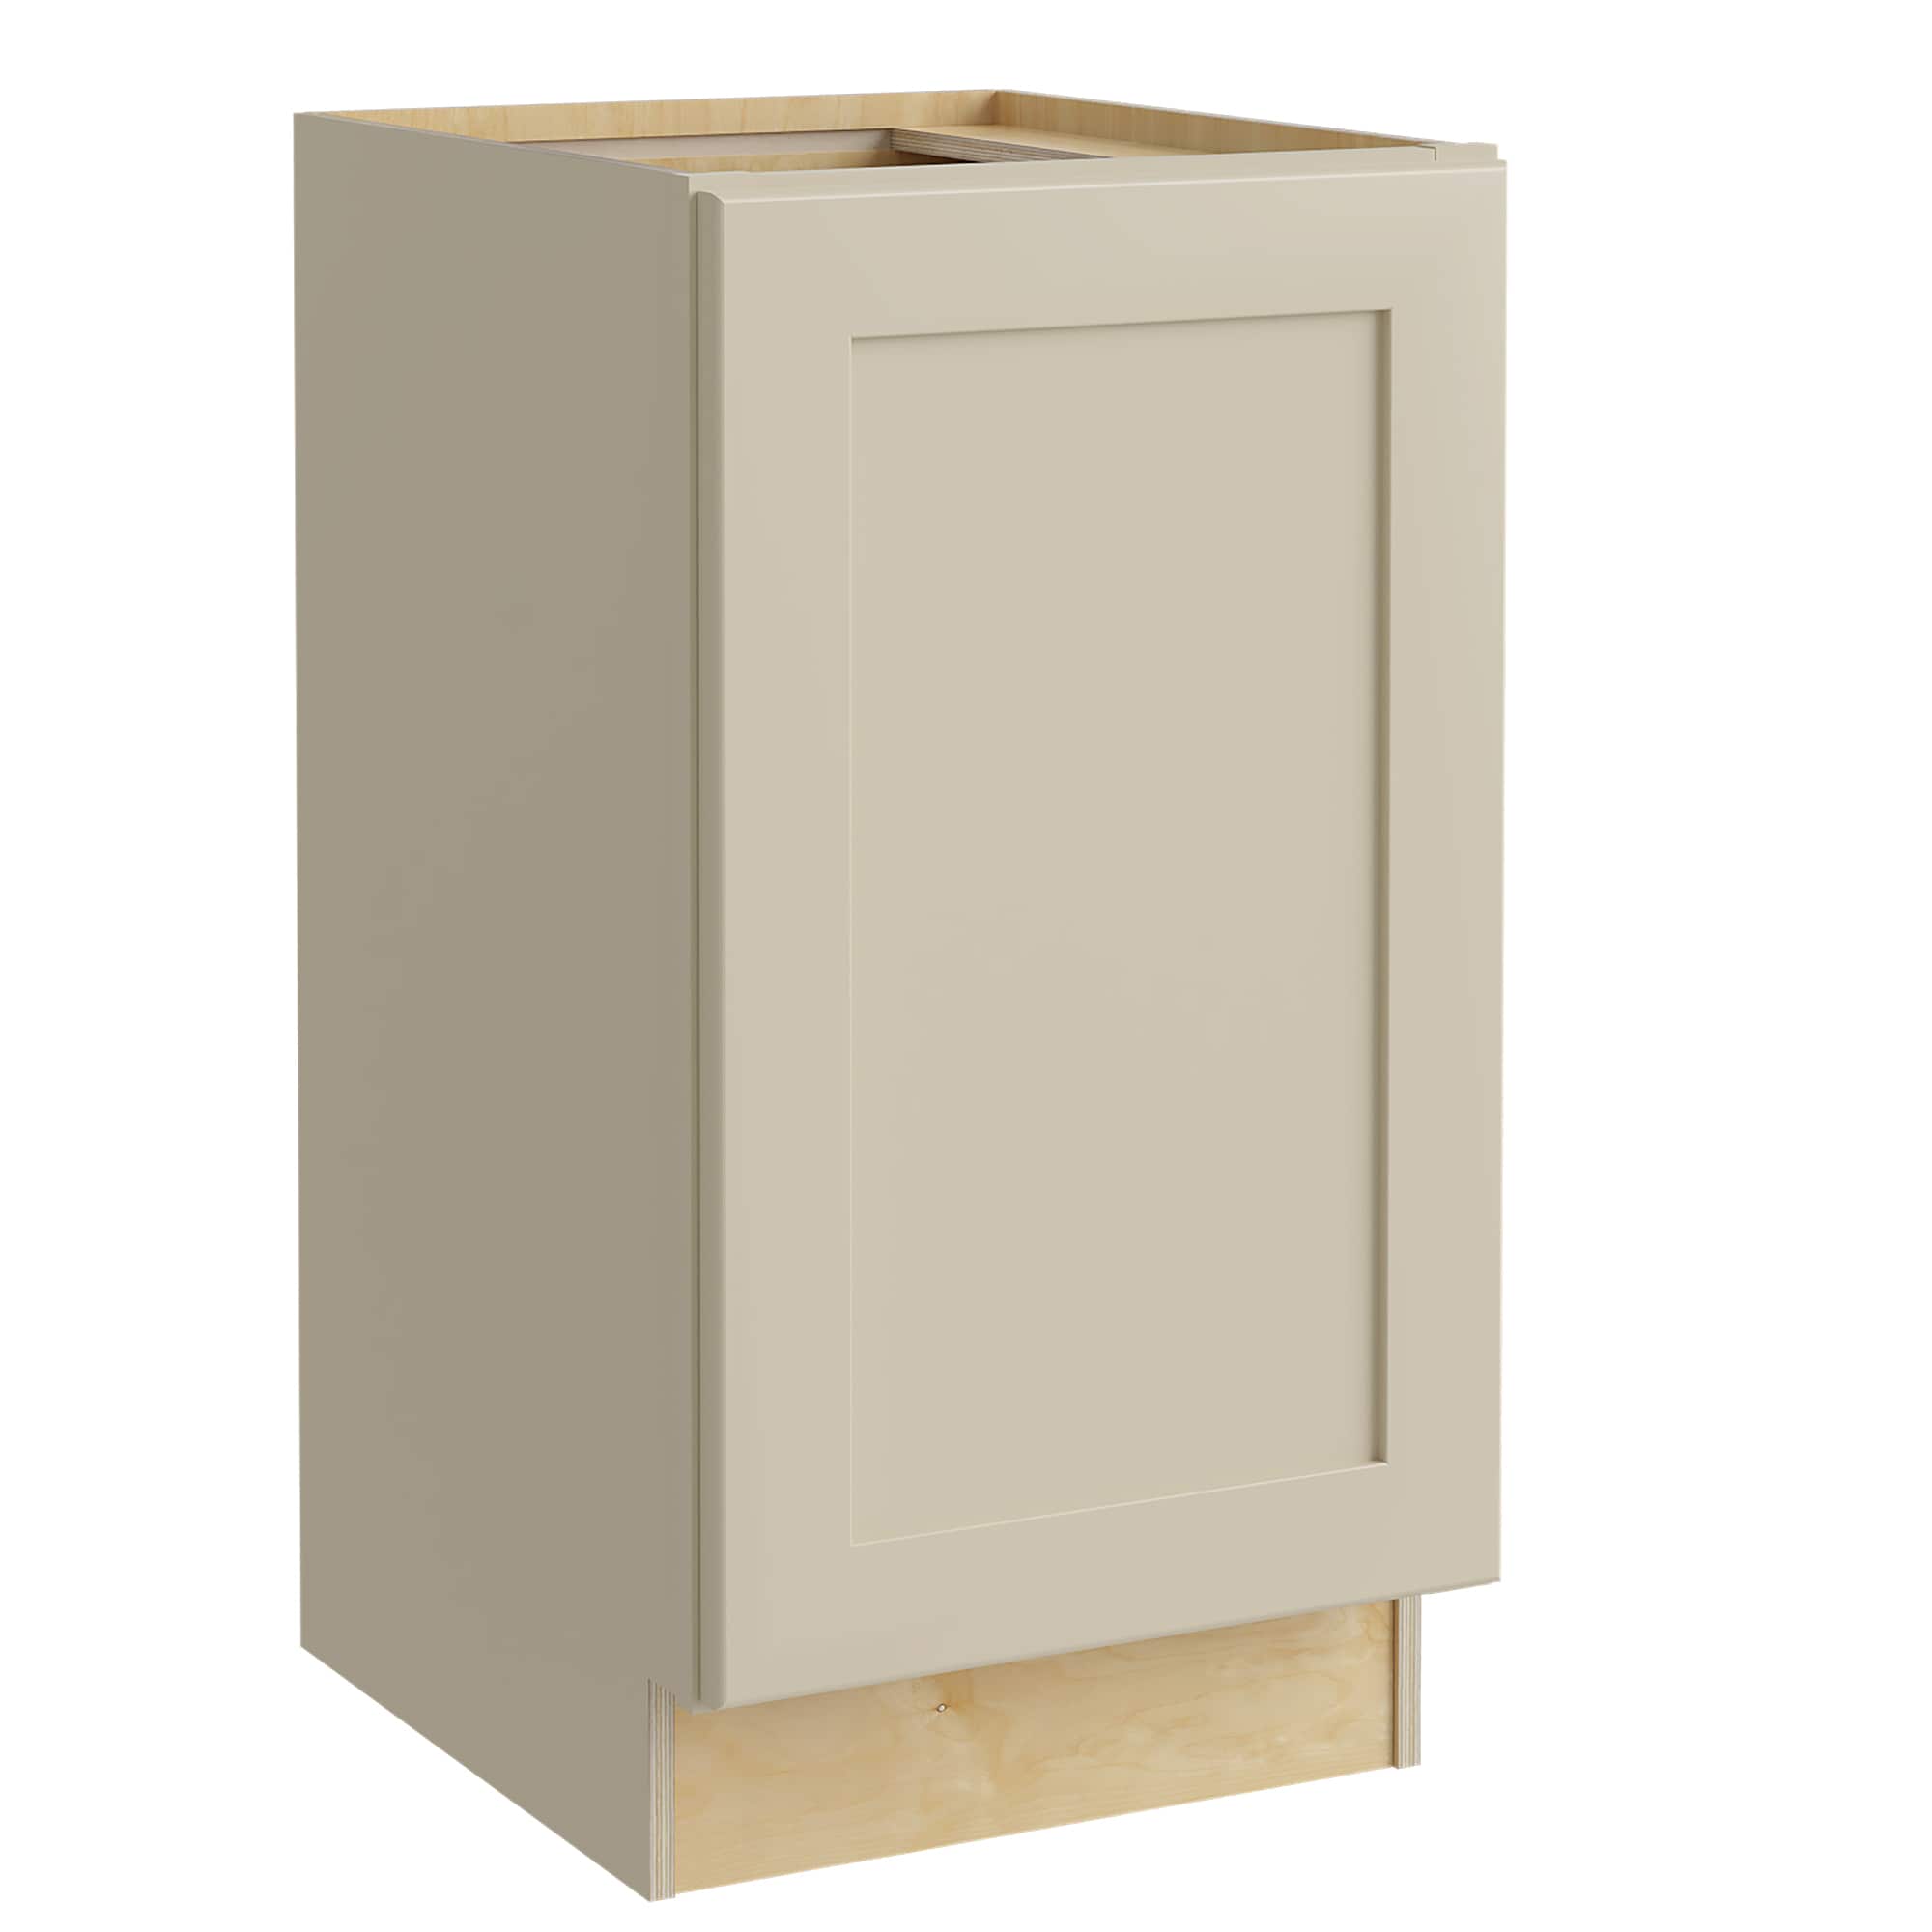 Luxxe Cabinetry 18-in W x 34.5-in H x 24-in D Norfolk Blended Cream Painted Door Base Fully Assembled Semi-custom Cabinet in Off-White | B18FHL-NBC